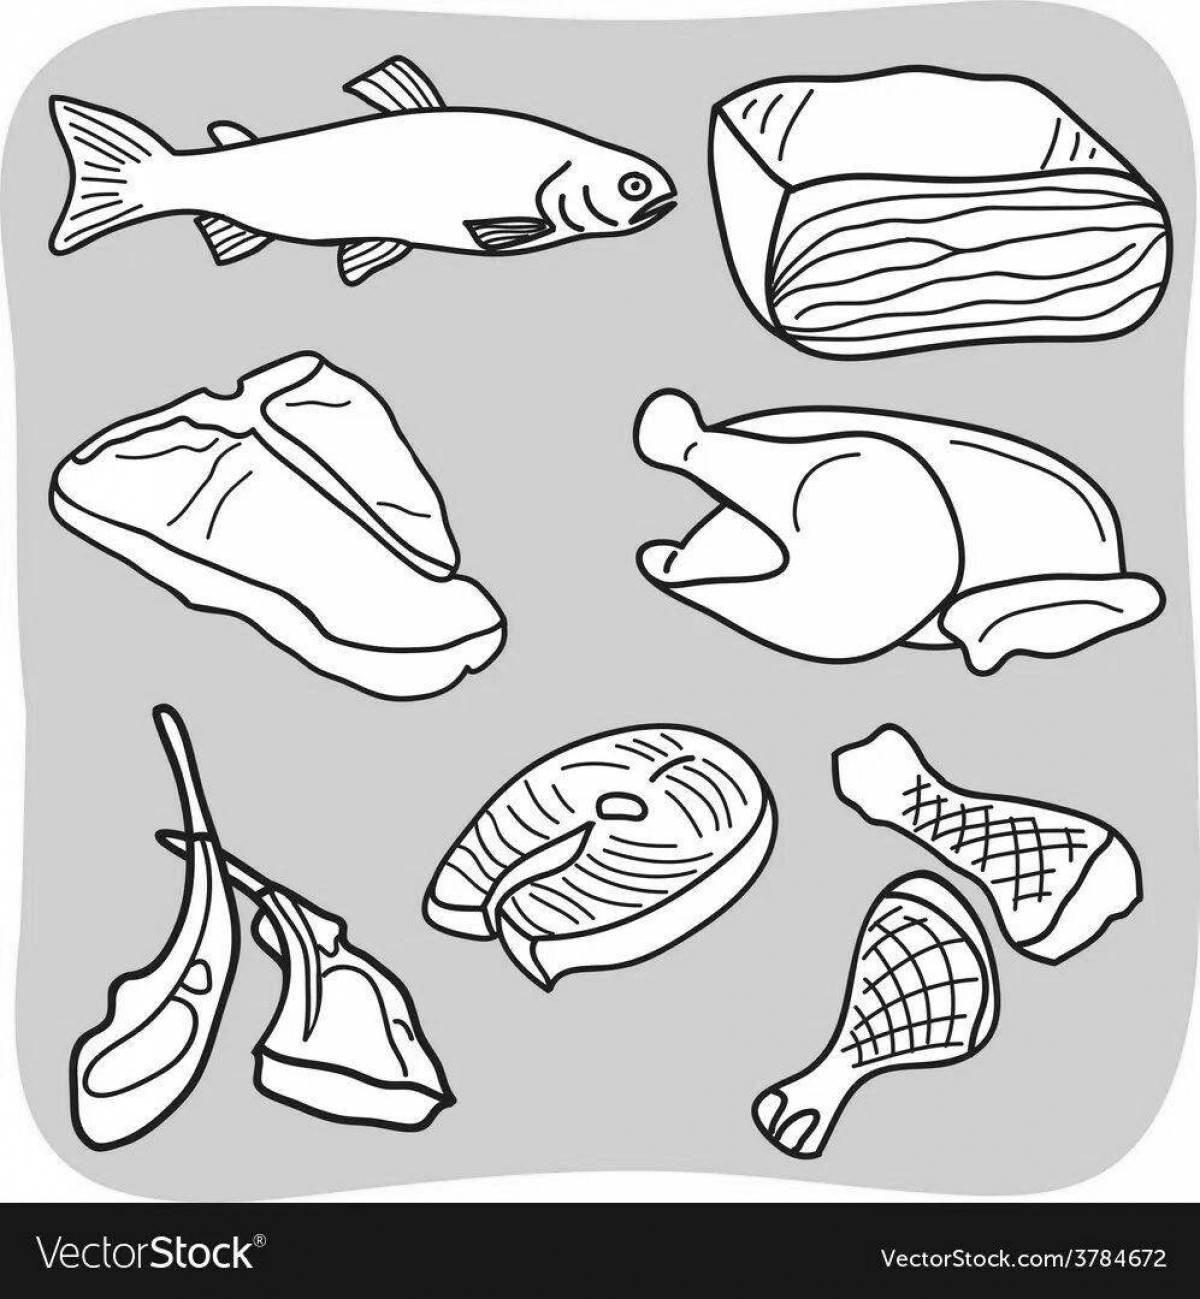 Colourful fish food coloring pages for kids